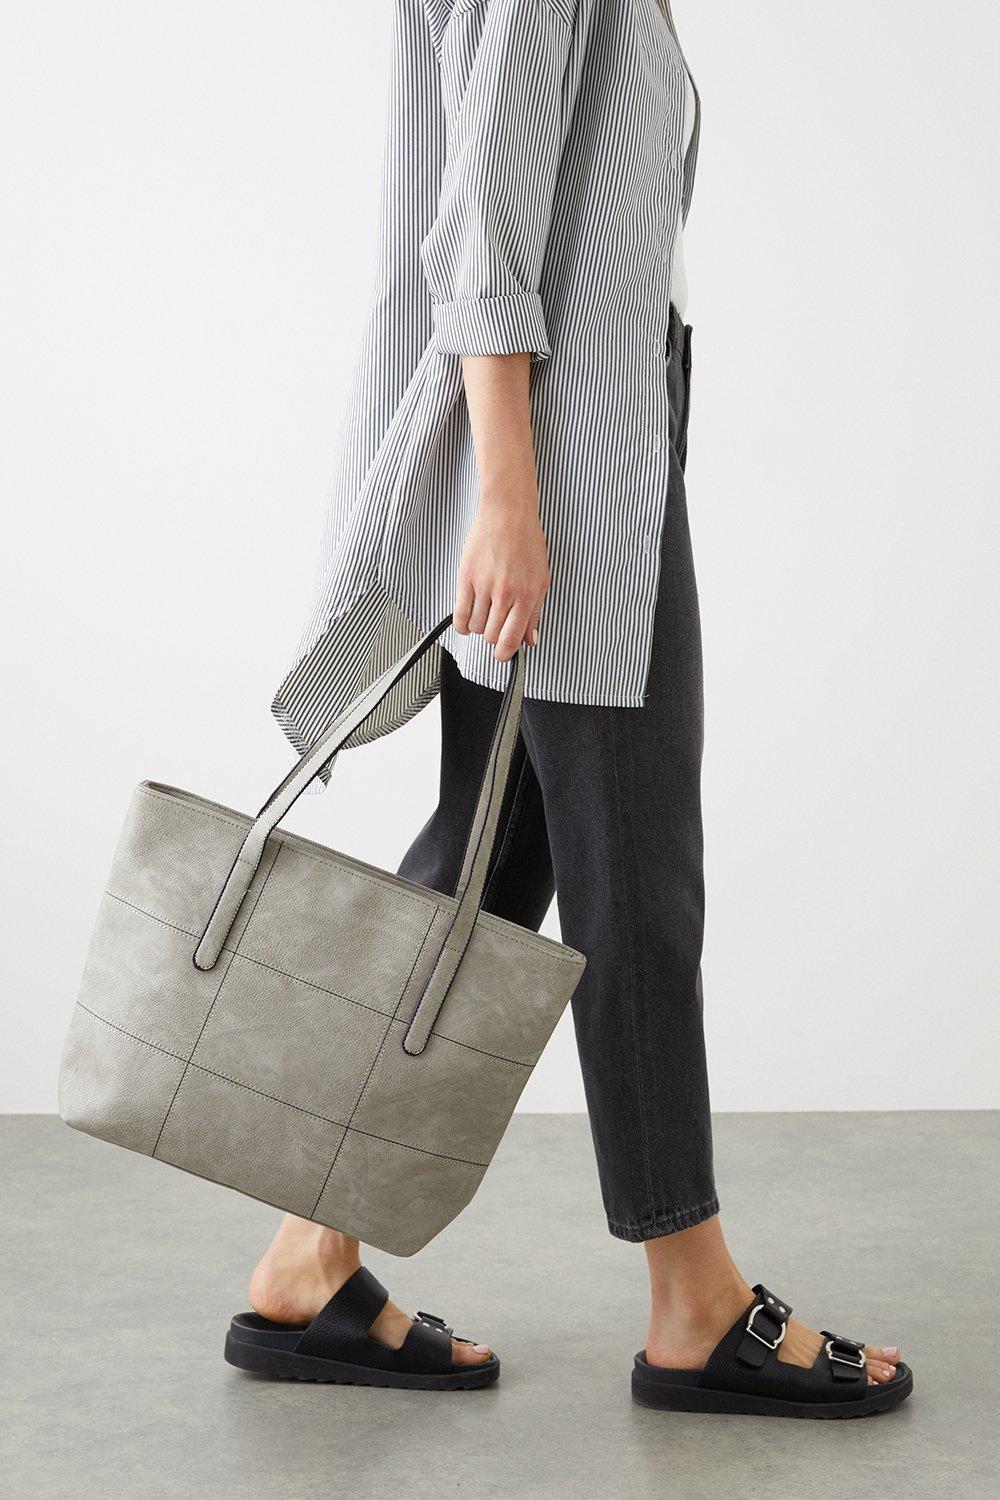 Women’s Trish Stitched Tote Bag - grey - ONE SIZE